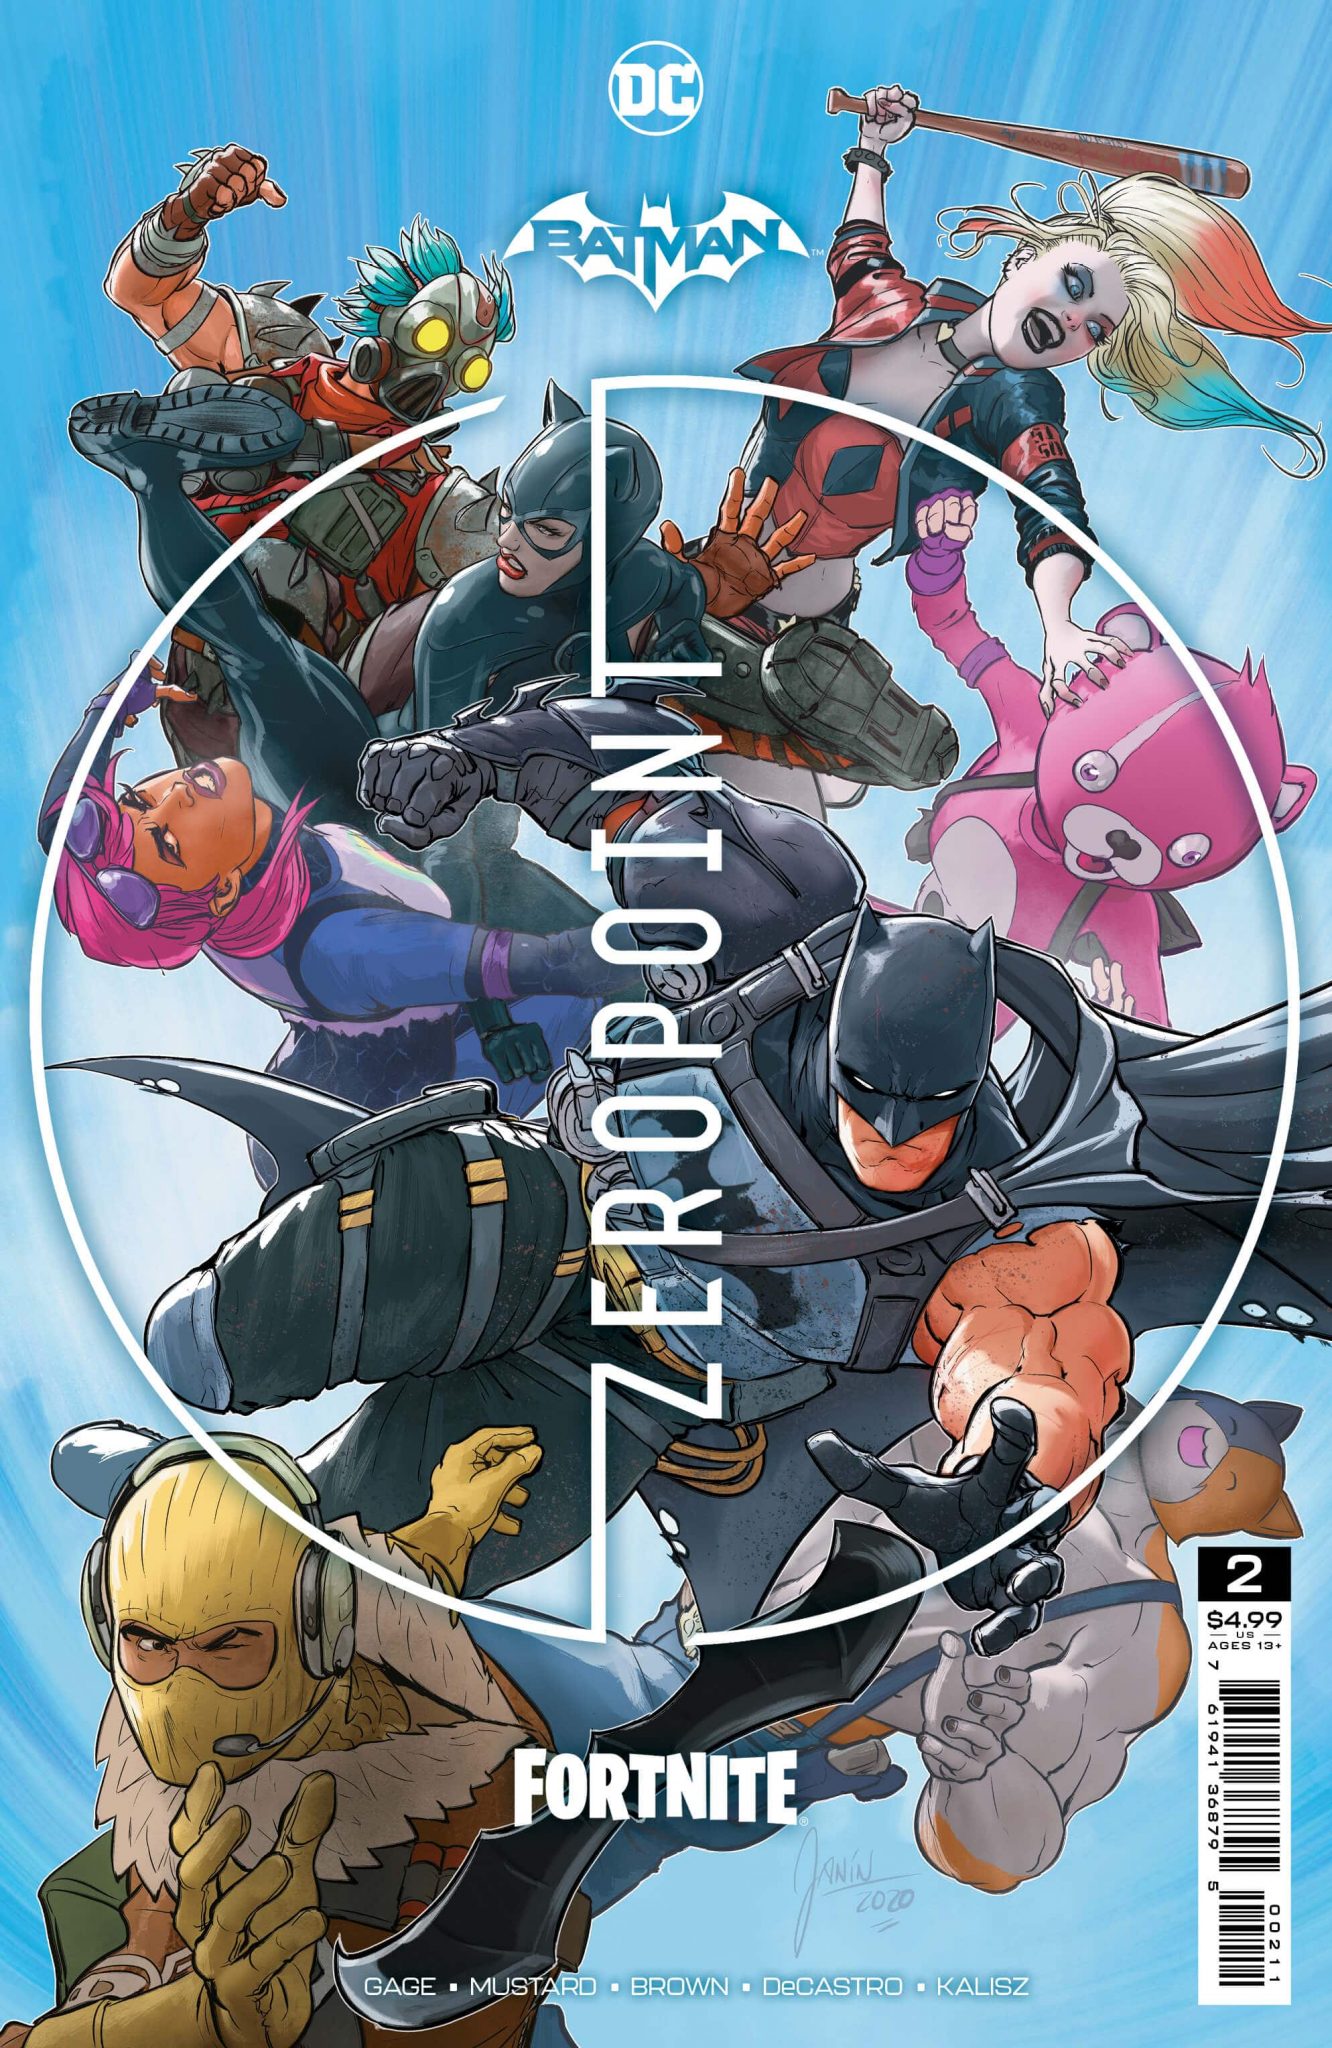 Batman/Fortnite Zero Point comic how to buy and receive the codes